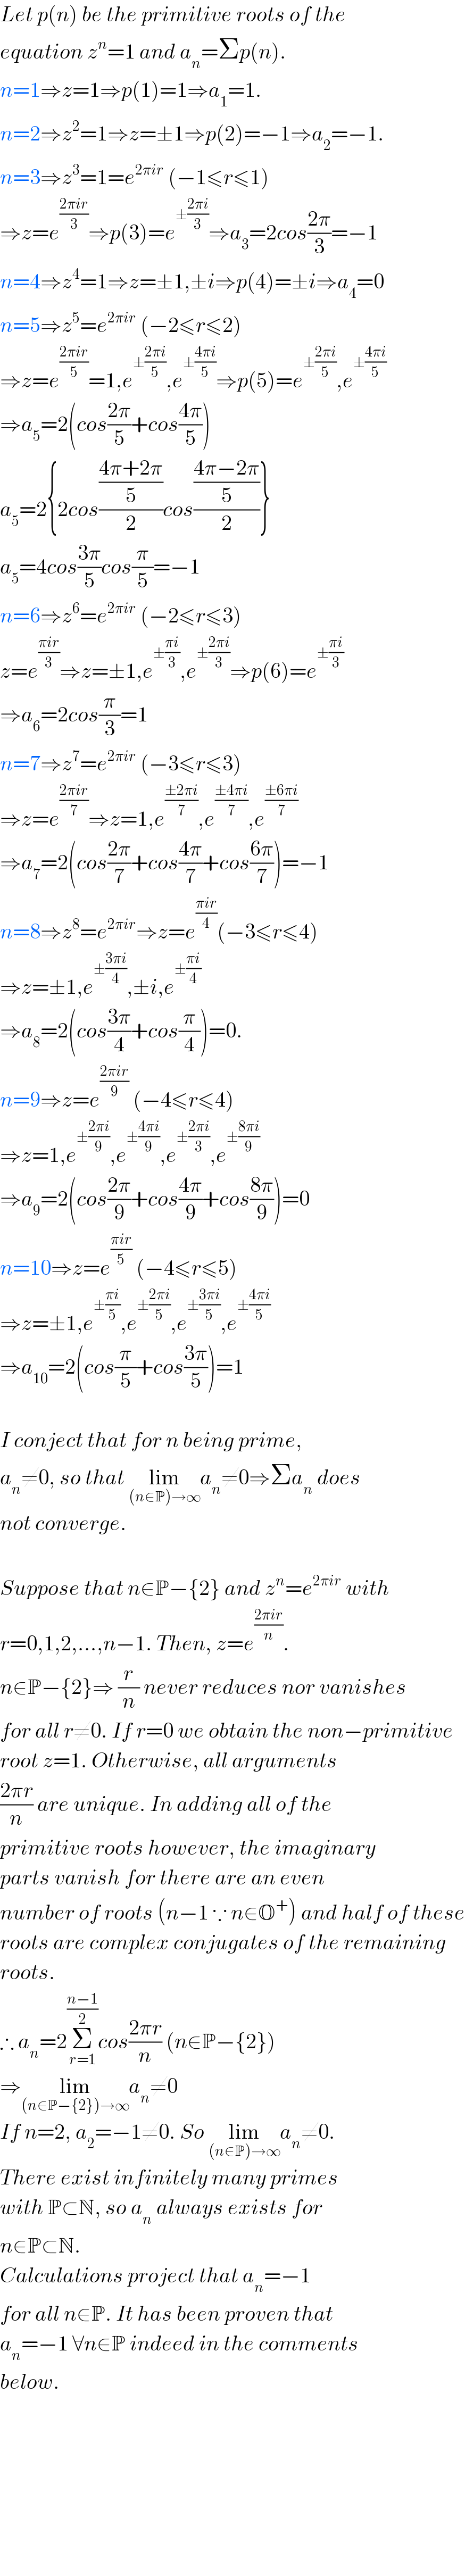 Let p(n) be the primitive roots of the  equation z^n =1 and a_n =Σp(n).  n=1⇒z=1⇒p(1)=1⇒a_1 =1.  n=2⇒z^2 =1⇒z=±1⇒p(2)=−1⇒a_2 =−1.  n=3⇒z^3 =1=e^(2πir)  (−1≤r≤1)   ⇒z=e^((2πir)/3) ⇒p(3)=e^(±((2πi)/3)) ⇒a_3 =2cos((2π)/3)=−1  n=4⇒z^4 =1⇒z=±1,±i⇒p(4)=±i⇒a_4 =0  n=5⇒z^5 =e^(2πir)  (−2≤r≤2)  ⇒z=e^((2πir)/5) =1,e^(±((2πi)/5)) ,e^(±((4πi)/5)) ⇒p(5)=e^(±((2πi)/5)) ,e^(±((4πi)/5))   ⇒a_5 =2(cos((2π)/5)+cos((4π)/5))  a_5 =2{2cos(((4π+2π)/5)/2)cos(((4π−2π)/5)/2)}  a_5 =4cos((3π)/5)cos(π/5)=−1  n=6⇒z^6 =e^(2πir)  (−2≤r≤3)  z=e^((πir)/3) ⇒z=±1,e^(±((πi)/3)) ,e^(±((2πi)/3)) ⇒p(6)=e^(±((πi)/3))   ⇒a_6 =2cos(π/3)=1  n=7⇒z^7 =e^(2πir)  (−3≤r≤3)  ⇒z=e^((2πir)/7) ⇒z=1,e^((±2πi)/7) ,e^((±4πi)/7) ,e^((±6πi)/7)   ⇒a_7 =2(cos((2π)/7)+cos((4π)/7)+cos((6π)/7))=−1  n=8⇒z^8 =e^(2πir) ⇒z=e^((πir)/4) (−3≤r≤4)  ⇒z=±1,e^(±((3πi)/4)) ,±i,e^(±((πi)/4))   ⇒a_8 =2(cos((3π)/4)+cos(π/4))=0.  n=9⇒z=e^((2πir)/9)  (−4≤r≤4)  ⇒z=1,e^(±((2πi)/9)) ,e^(±((4πi)/9)) ,e^(±((2πi)/3)) ,e^(±((8πi)/9))   ⇒a_9 =2(cos((2π)/9)+cos((4π)/9)+cos((8π)/9))=0  n=10⇒z=e^((πir)/5)  (−4≤r≤5)  ⇒z=±1,e^(±((πi)/5)) ,e^(±((2πi)/5)) ,e^(±((3πi)/5)) ,e^(±((4πi)/5))   ⇒a_(10) =2(cos(π/5)+cos((3π)/5))=1    I conject that for n being prime,  a_n ≠0, so that lim_((n∈P)→∞) a_n ≠0⇒Σa_n  does  not converge.     Suppose that n∈P−{2} and z^n =e^(2πir)  with  r=0,1,2,...,n−1. Then, z=e^((2πir)/n) .  n∈P−{2}⇒ (r/n) never reduces nor vanishes  for all r≠0. If r=0 we obtain the non−primitive  root z=1. Otherwise, all arguments   ((2πr)/n) are unique. In adding all of the  primitive roots however, the imaginary  parts vanish for there are an even   number of roots (n−1 ∵ n∈O^+ ) and half of these  roots are complex conjugates of the remaining  roots.  ∴ a_n =2Σ_(r=1) ^((n−1)/2) cos((2πr)/n) (n∈P−{2})  ⇒lim_((n∈P−{2})→∞) a_n ≠0  If n=2, a_2 =−1≠0. So lim_((n∈P)→∞) a_n ≠0.  There exist infinitely many primes   with P⊂N, so a_n  always exists for  n∈P⊂N.  Calculations project that a_n =−1  for all n∈P. It has been proven that  a_n =−1 ∀n∈P indeed in the comments   below.              